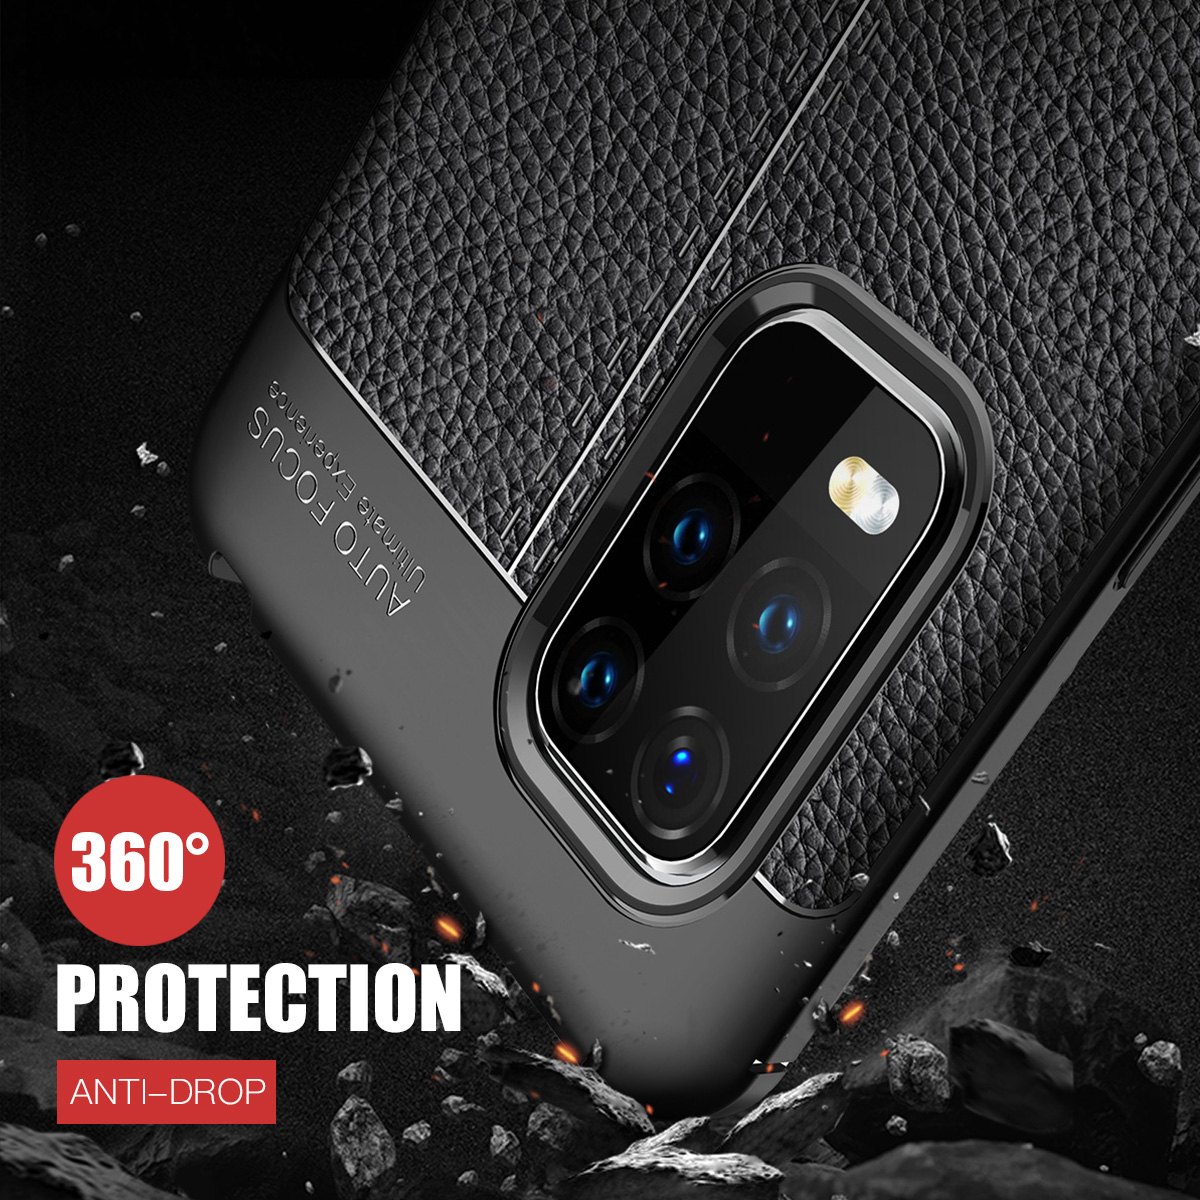 Bakeey-for-Xiaomi-Mi-10-Lite-Case-Litchi-Pattern-Shockproof-PU-Leather-TPU-Soft-Protective-Case-Back-1708407-3